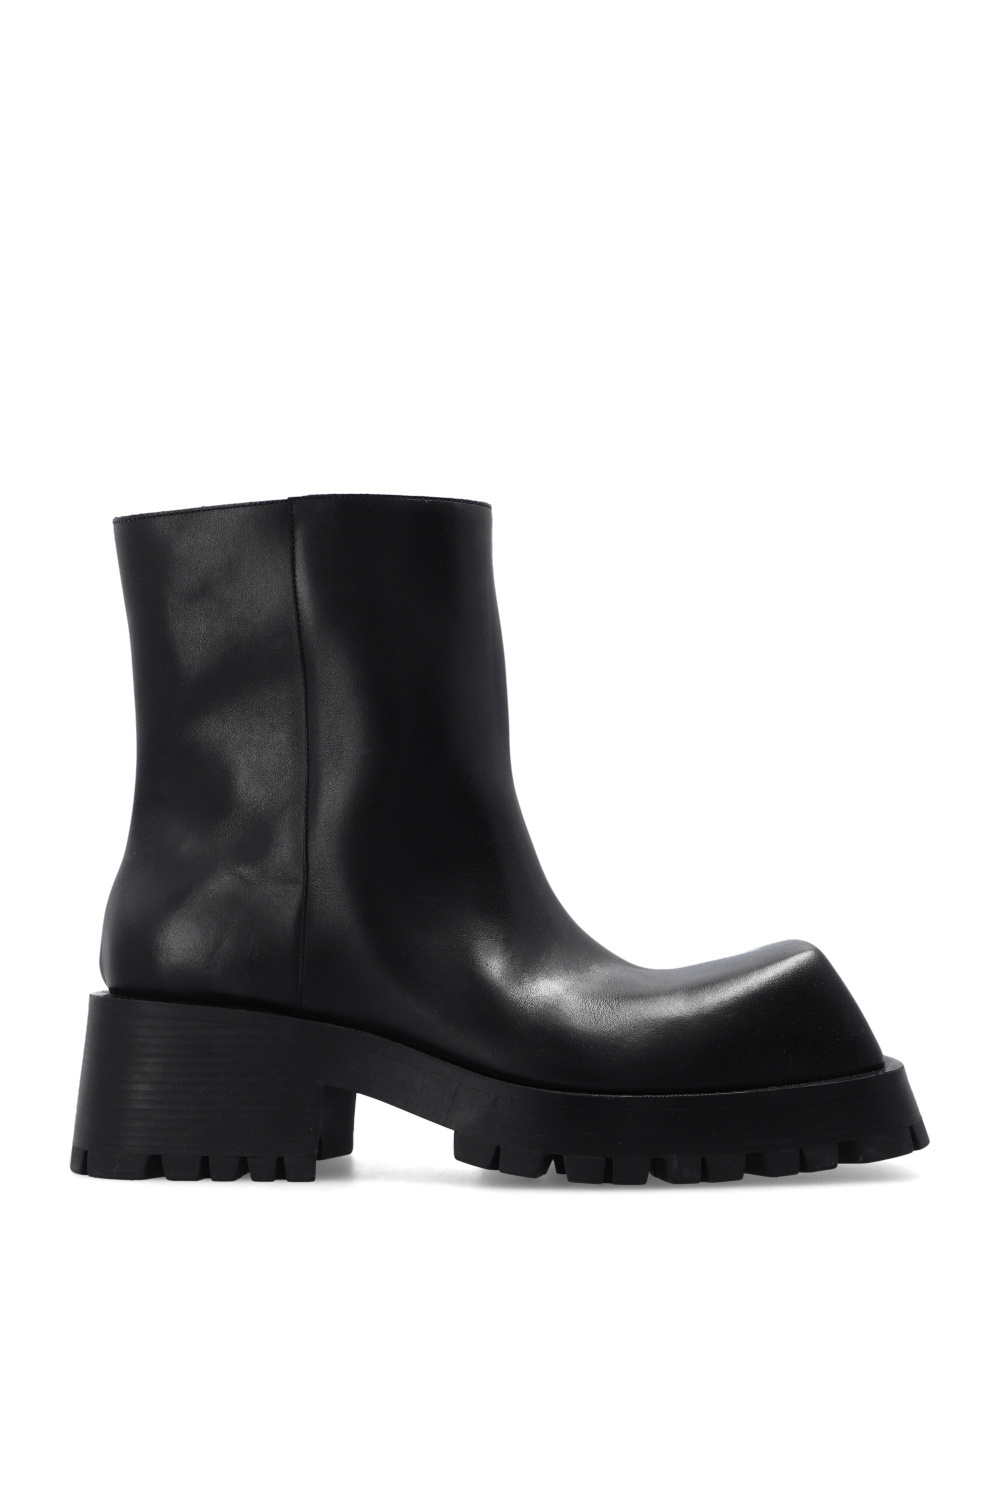 Black 'Trooper' ankle boots Balenciaga - Issue 3 Shoes Core Black 